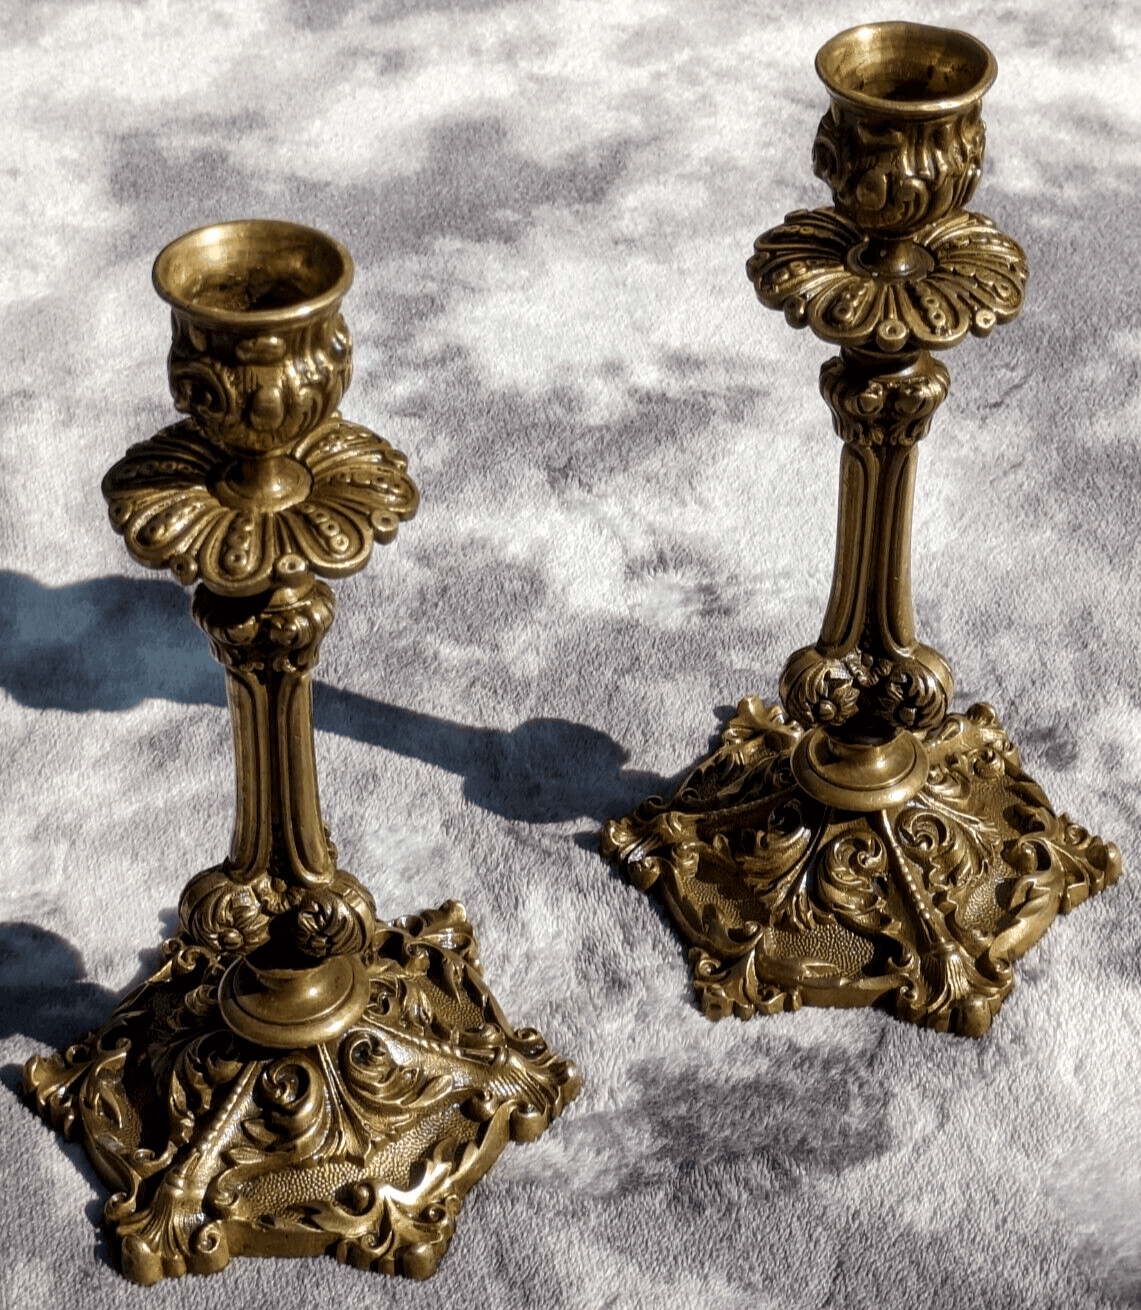 19th Century Antique Pair of Ornate Rococo Brass Candlestick Holders - 20.5 cm